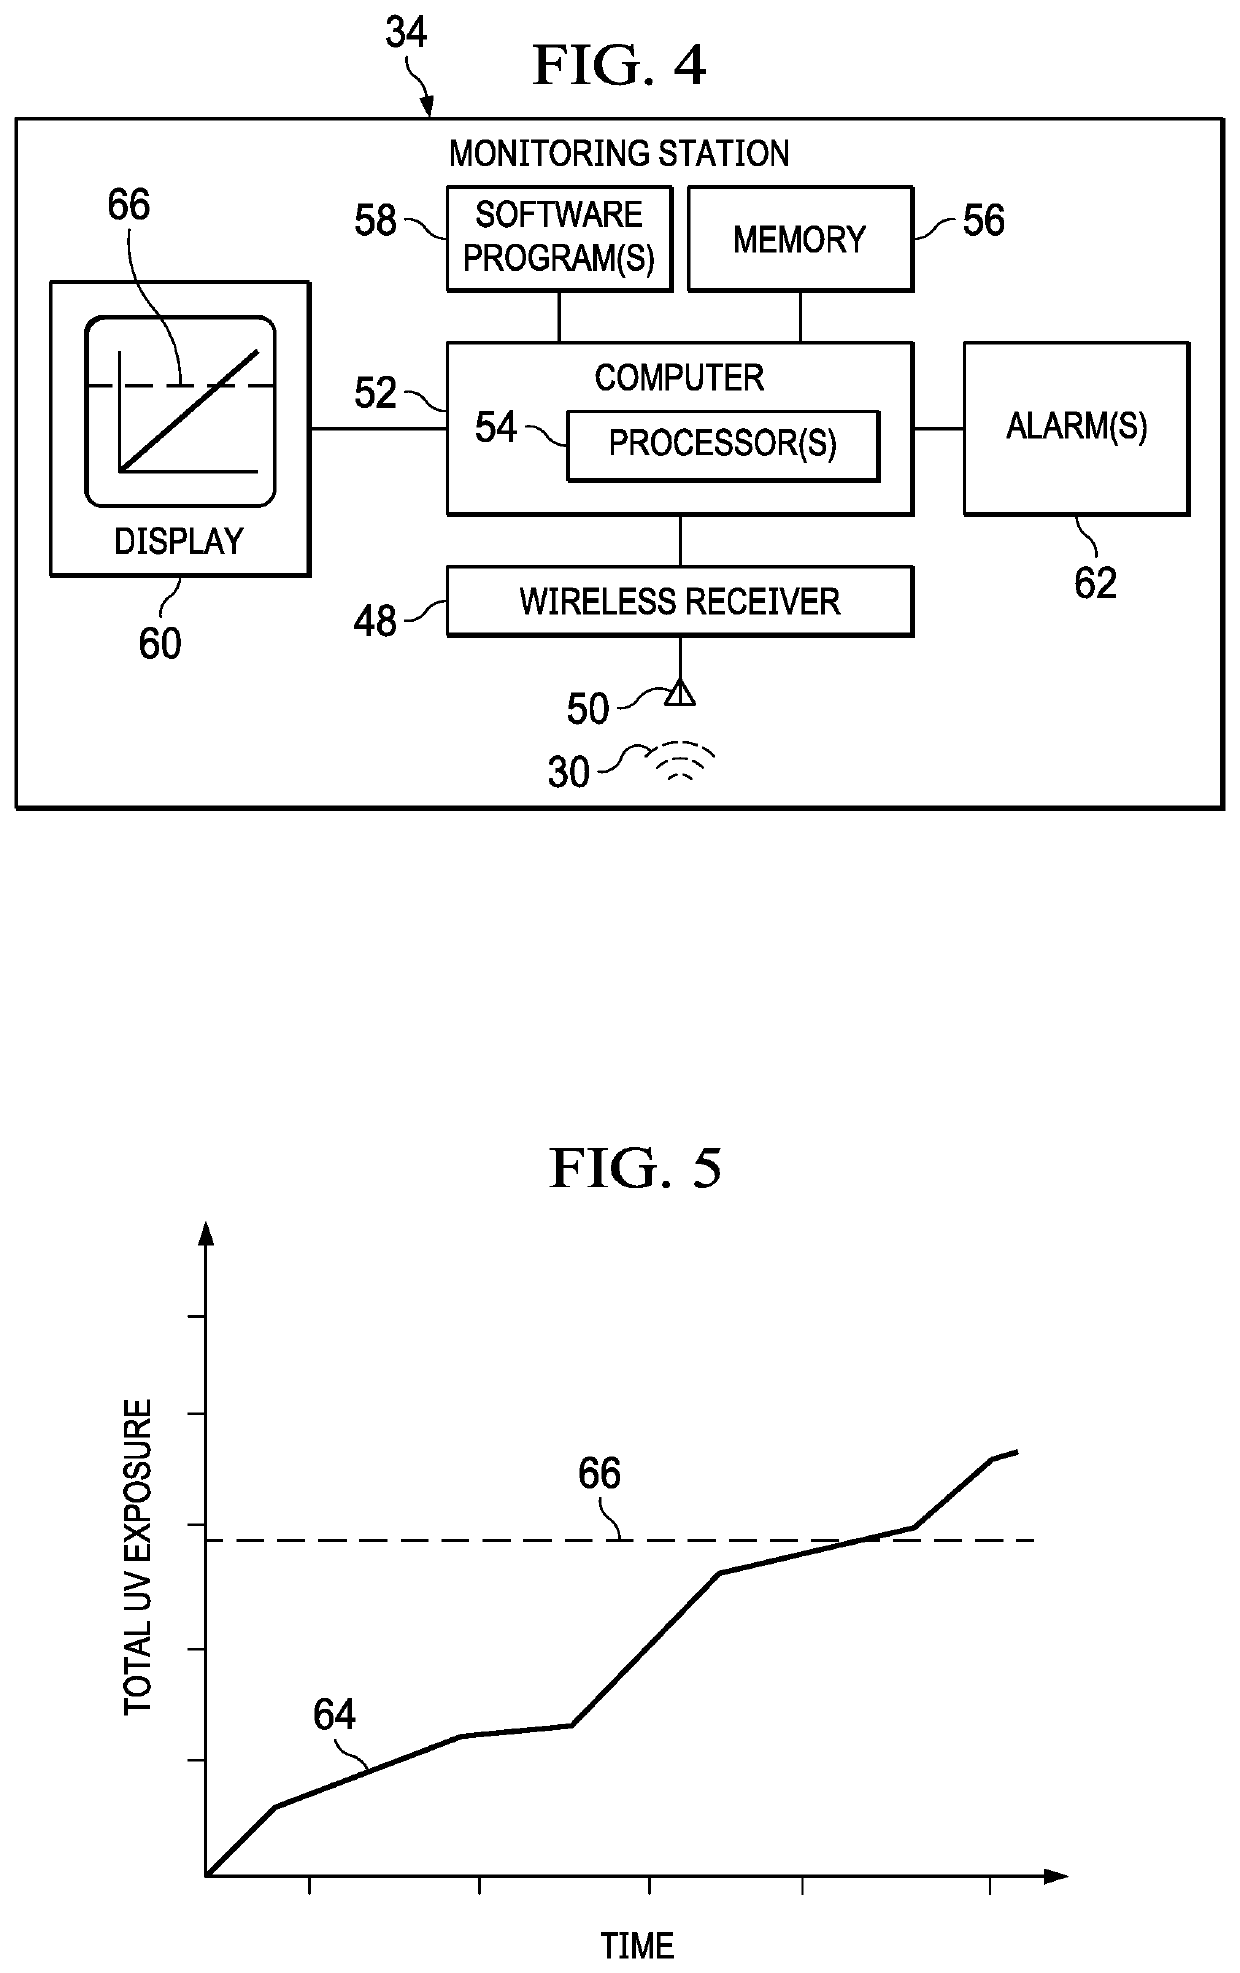 Method and Device for Monitoring UV Light Exposure